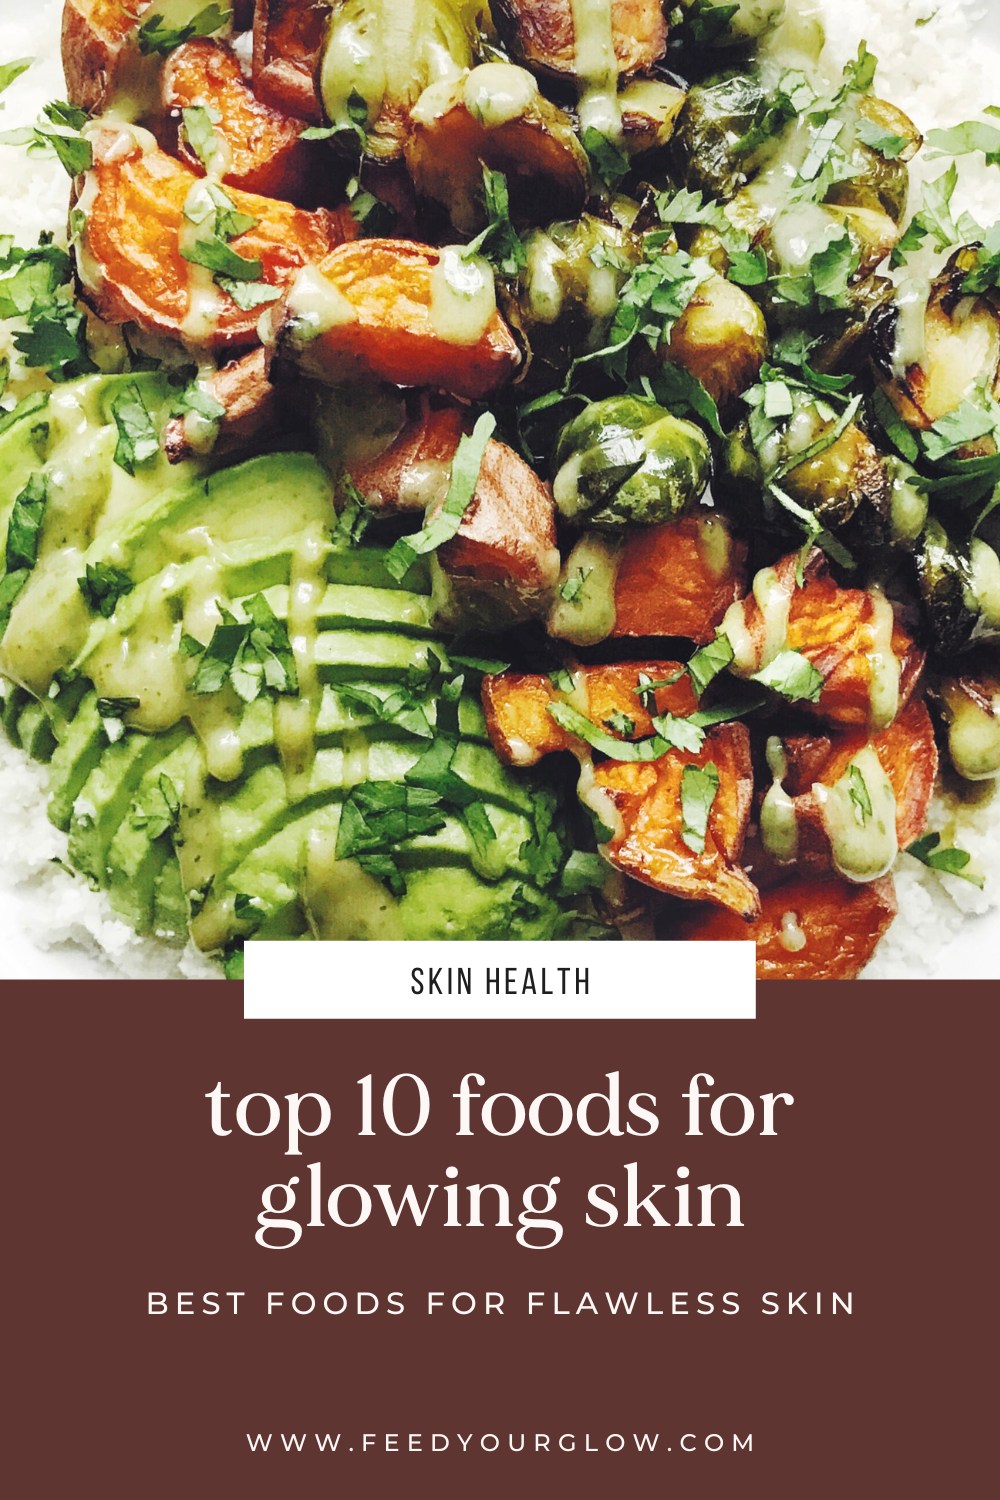 Top 10 Foods for Glowing Skin | Feed Your Glow